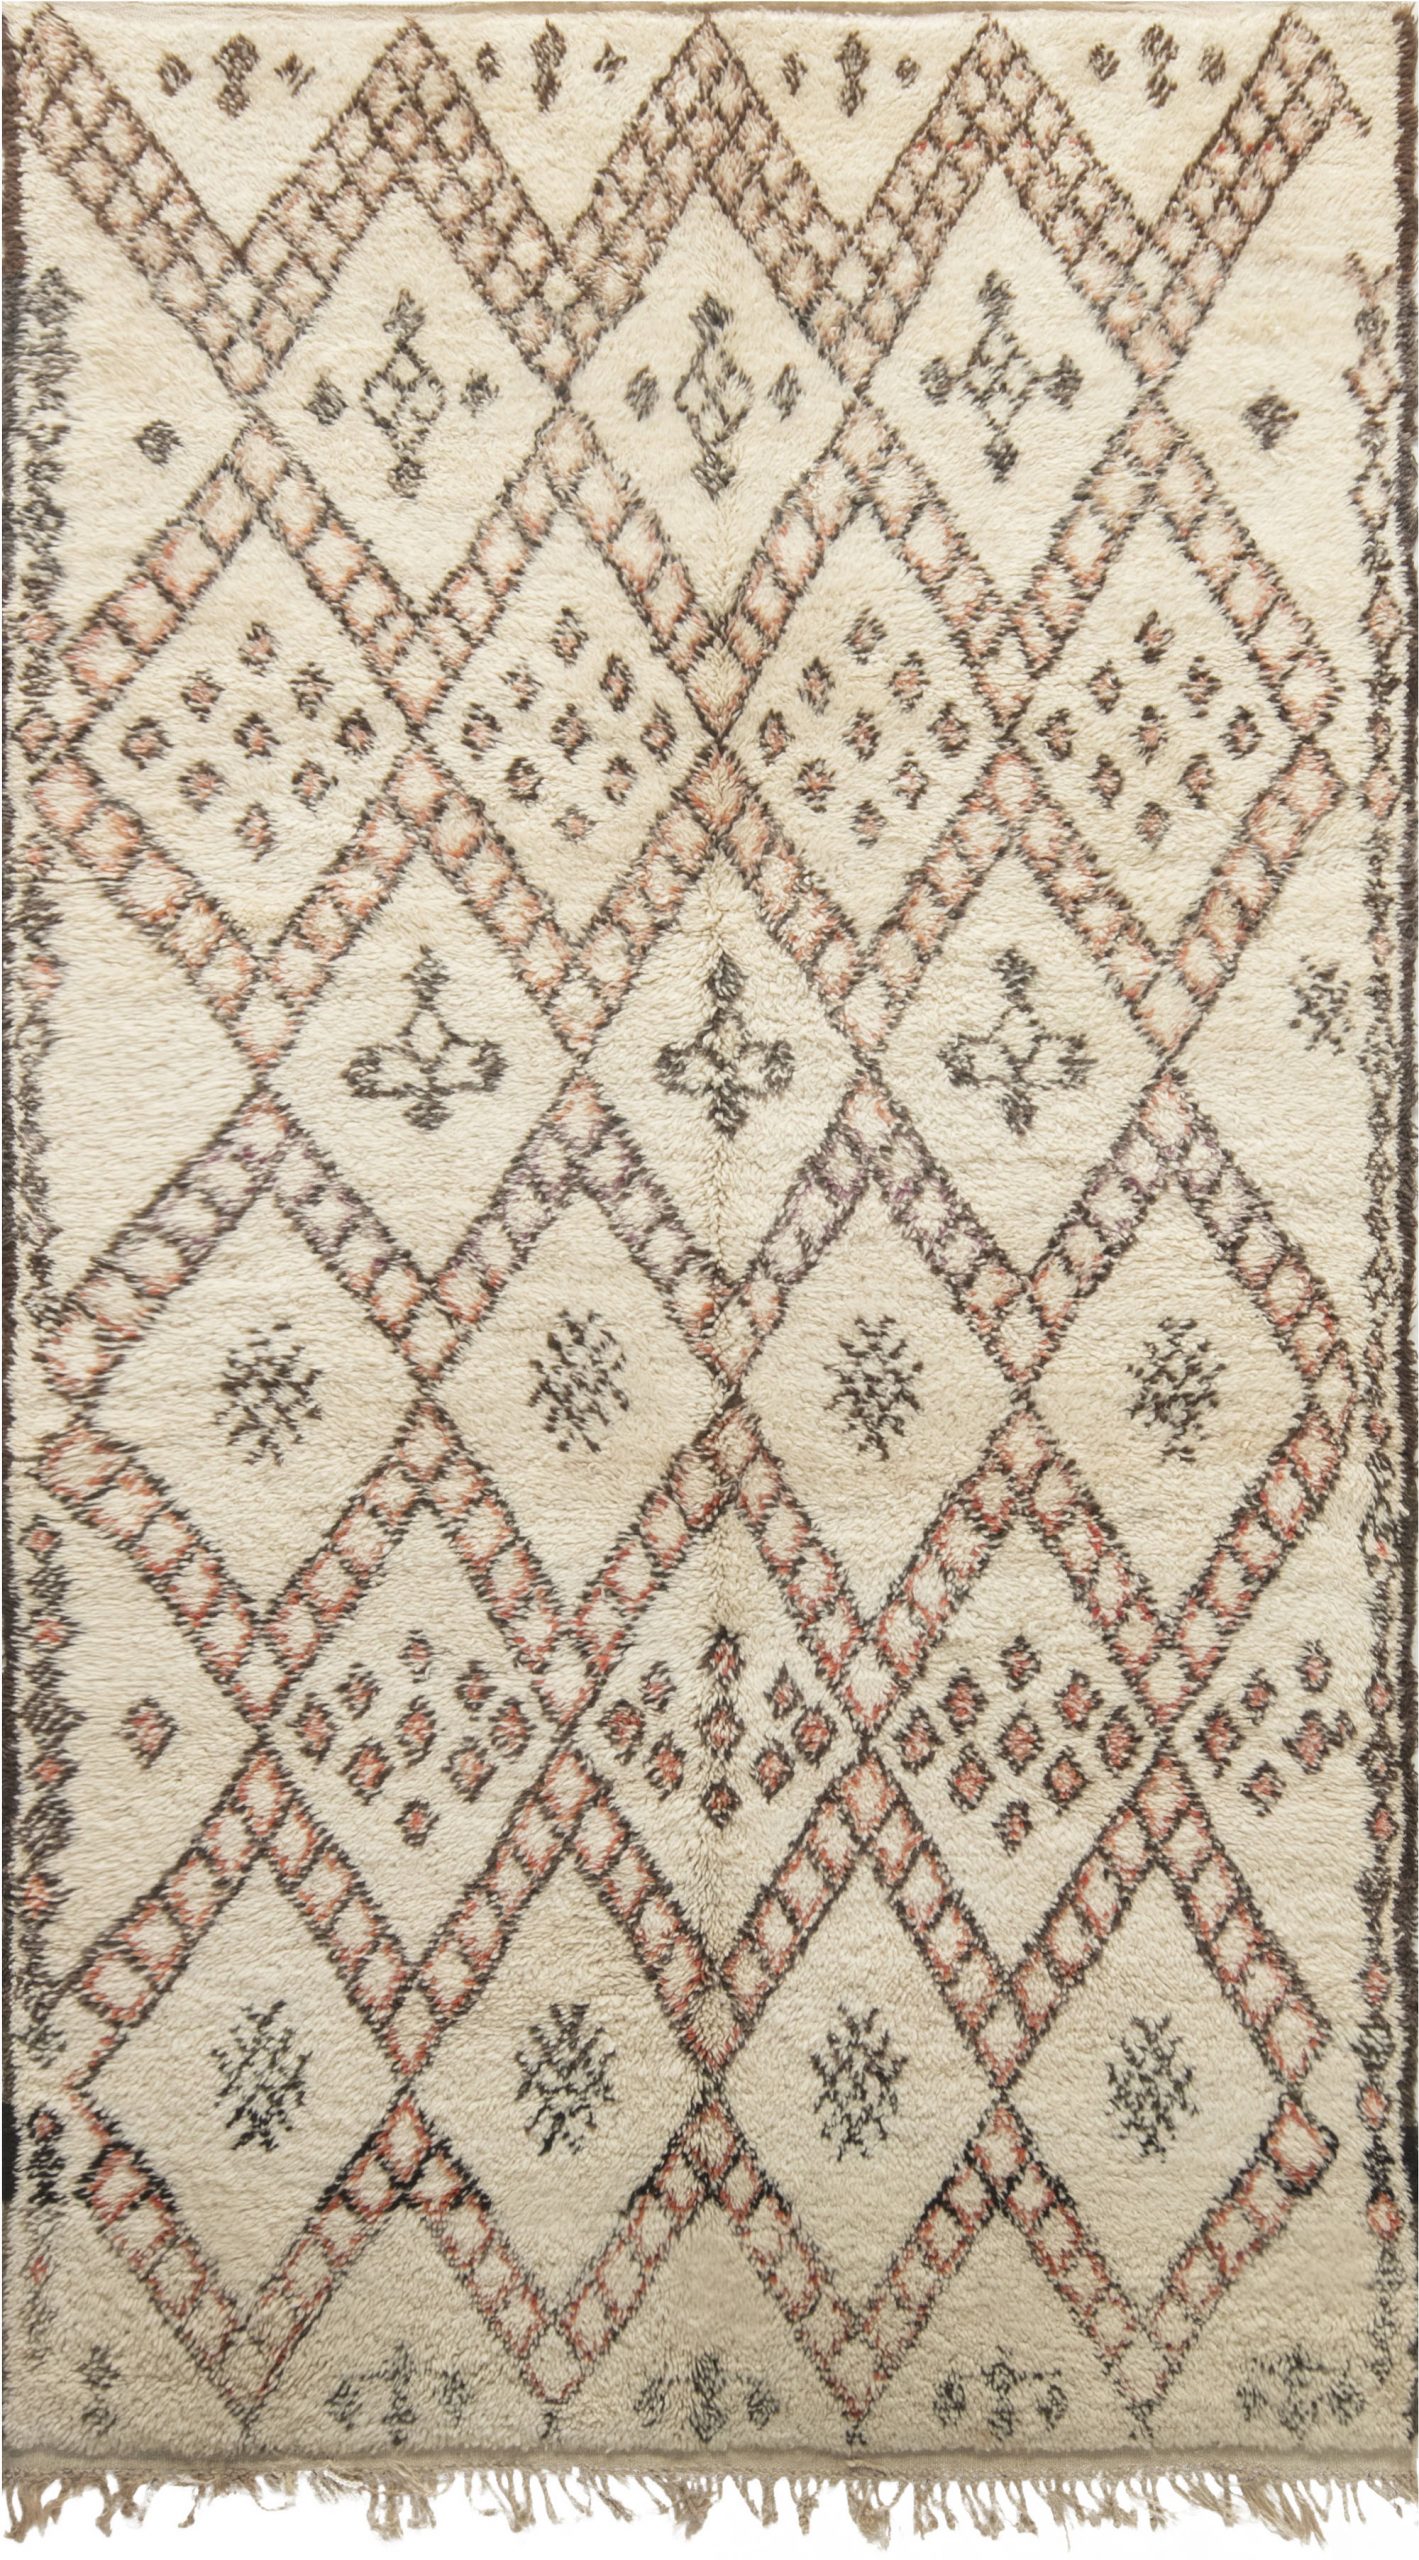 Vintage Tribal <mark class='searchwp-highlight'>Hand-knotted</mark> Moroccan Area Rug in White, Peach, and Brown BB6878